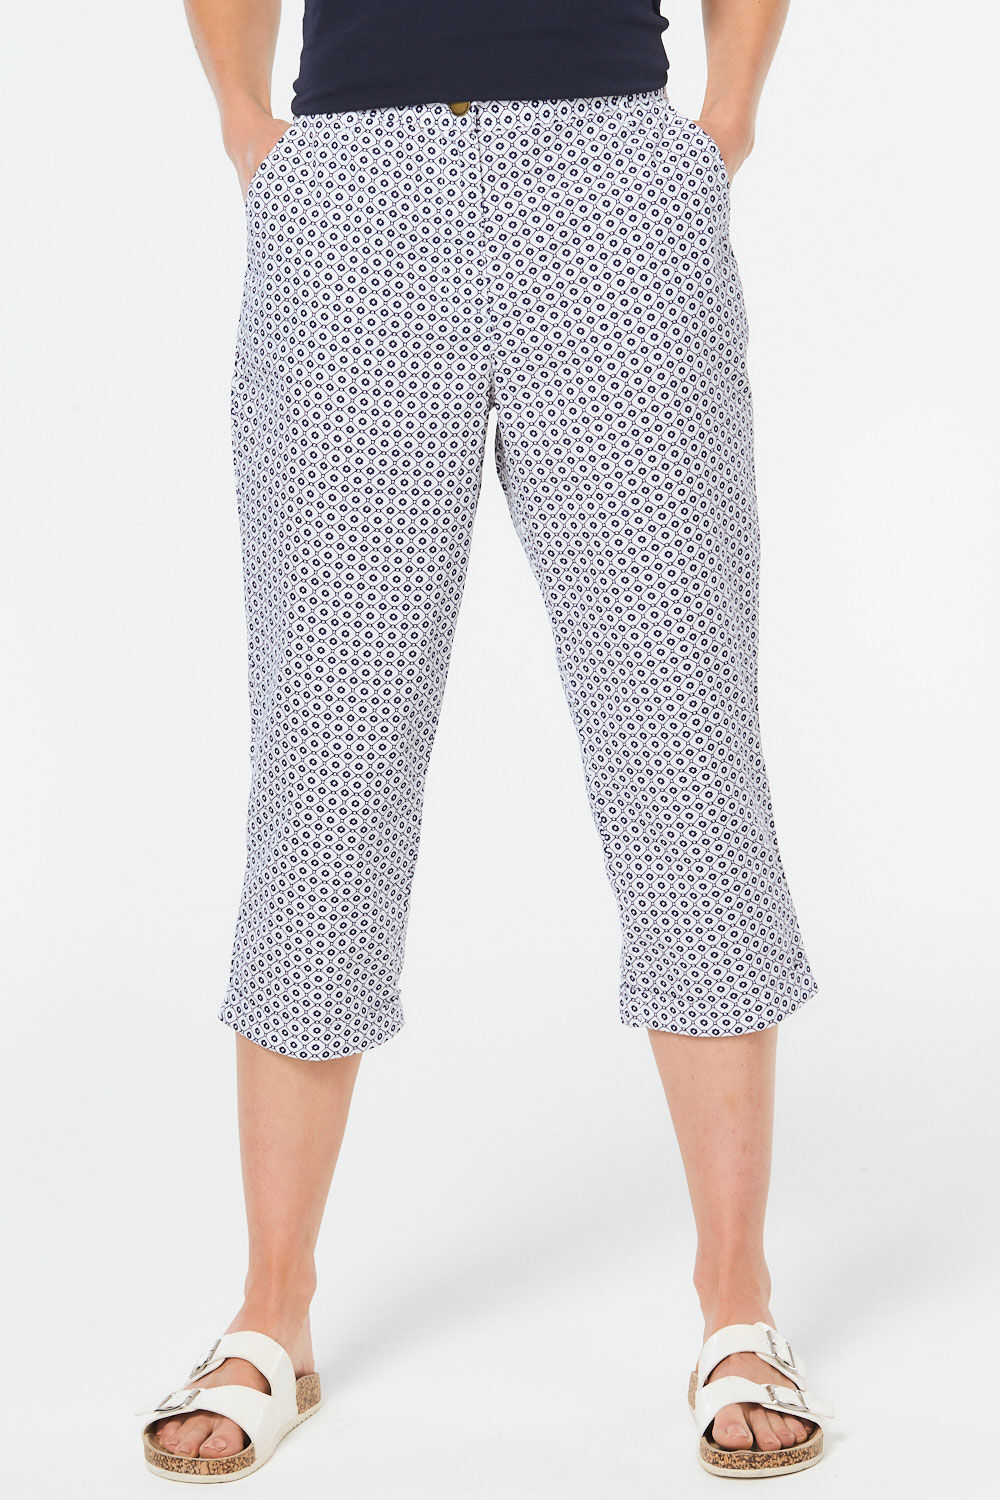 Buy Multicolored Trousers  Pants for Girls by INDIWEAVES Online  Ajiocom